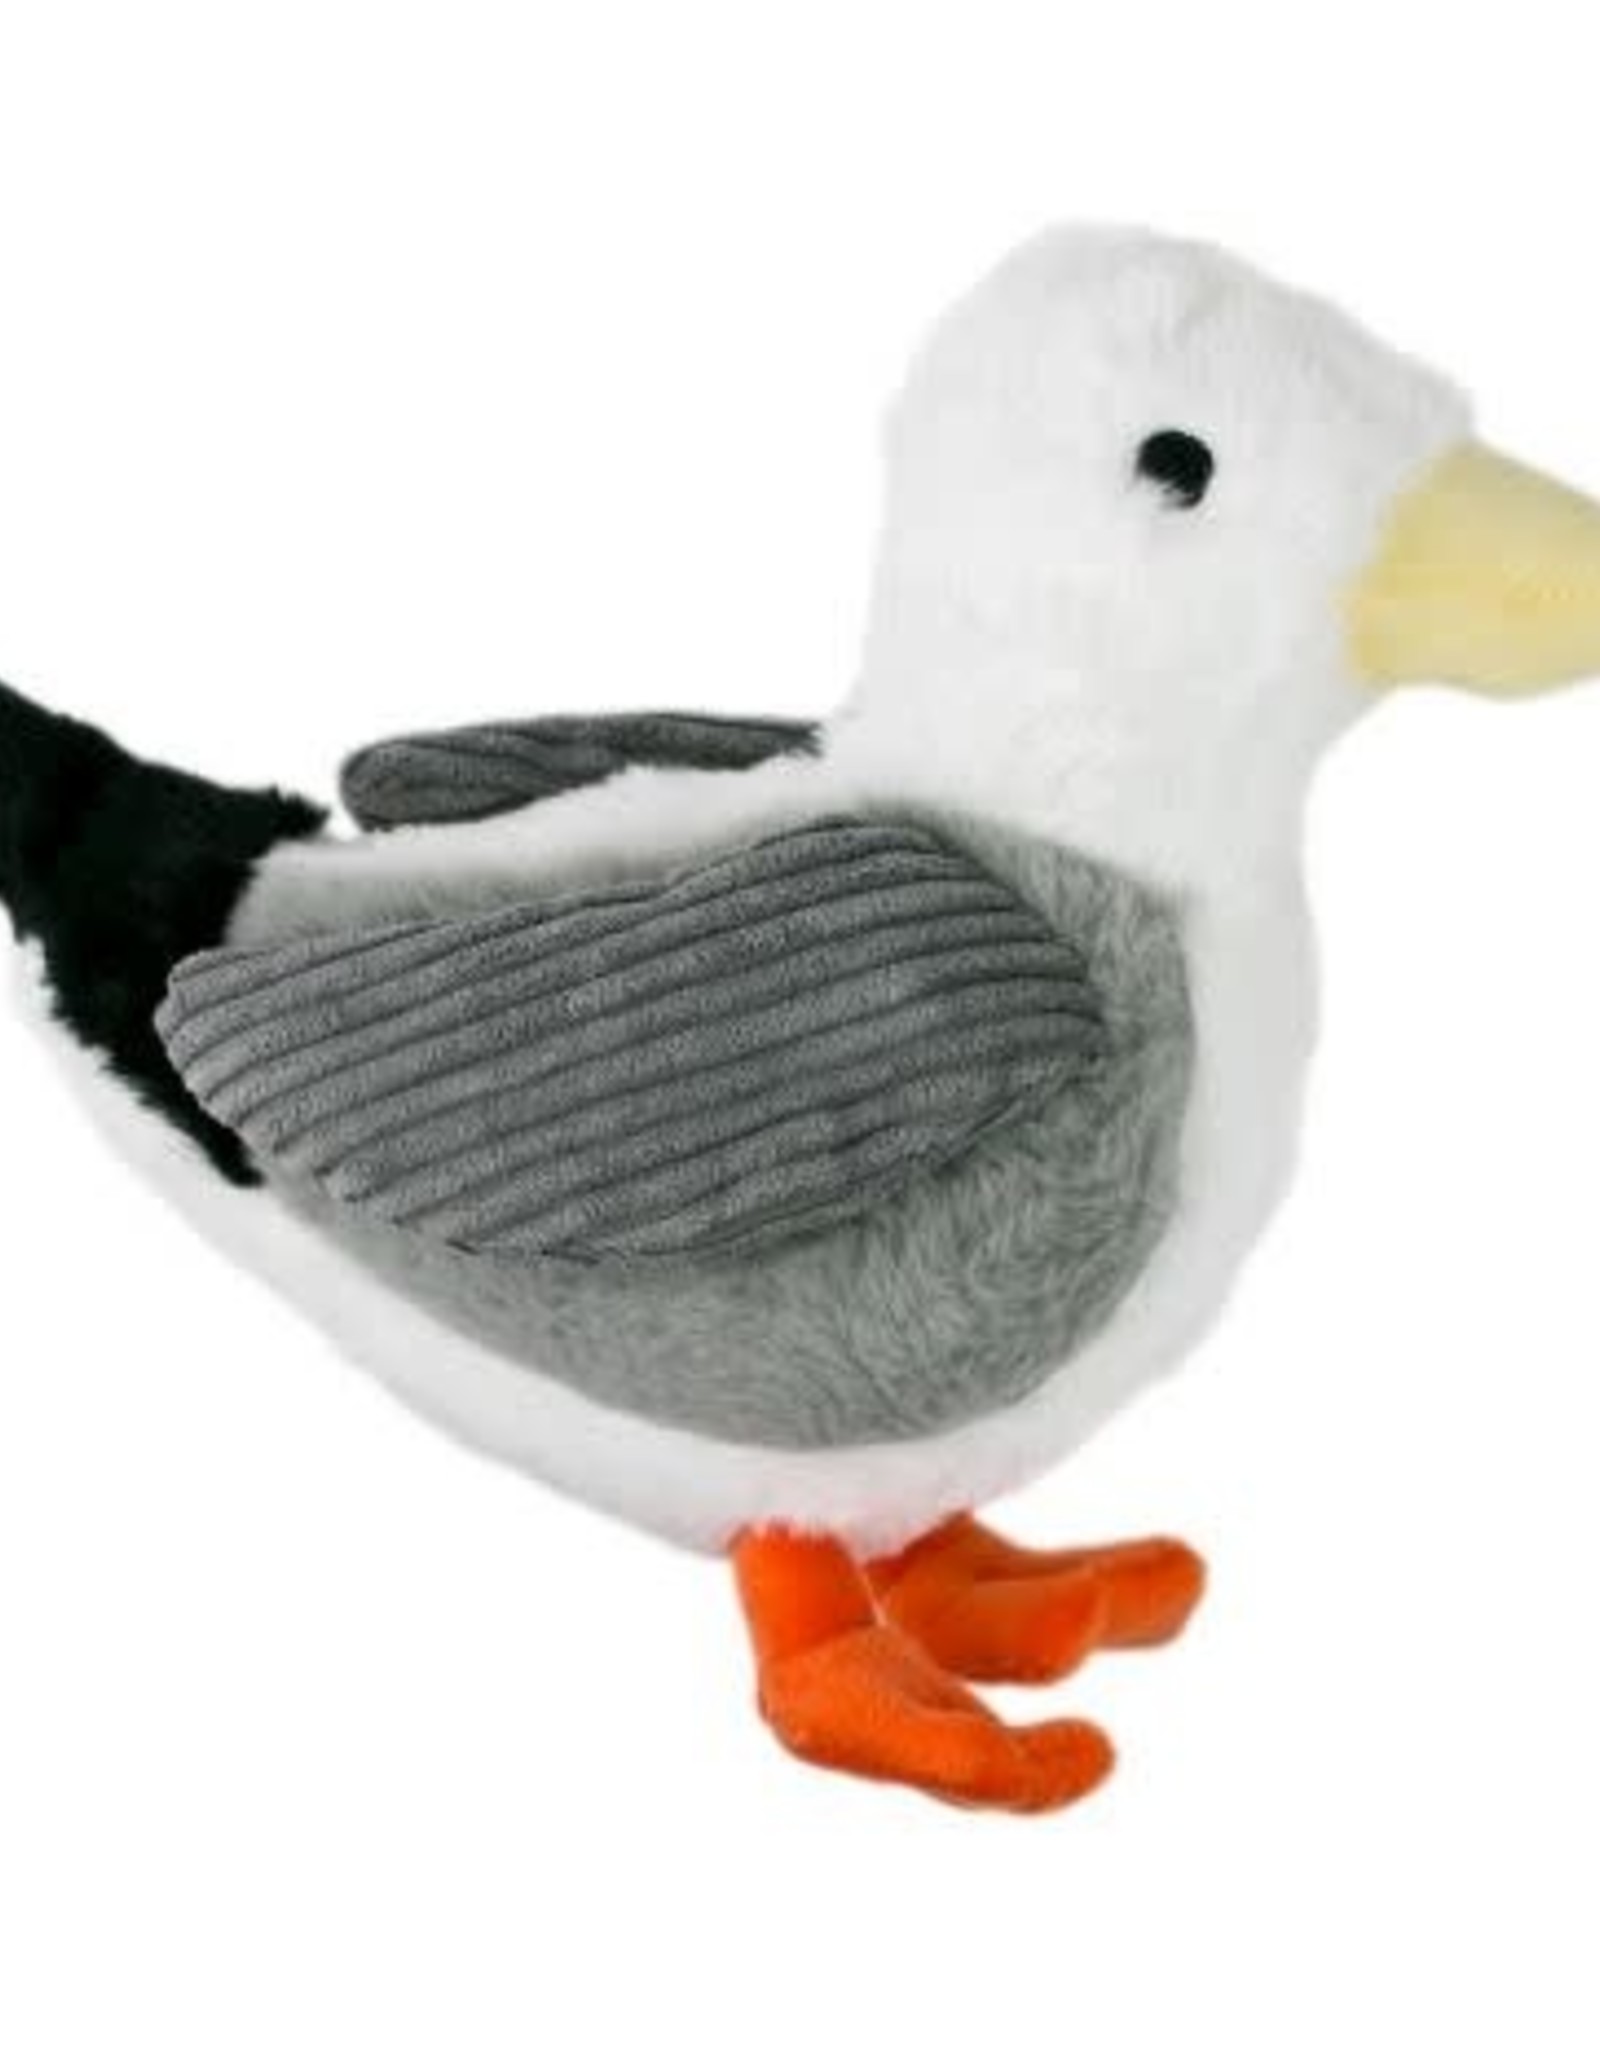 Tall Tails Tall Tails Animated Seagull Toy